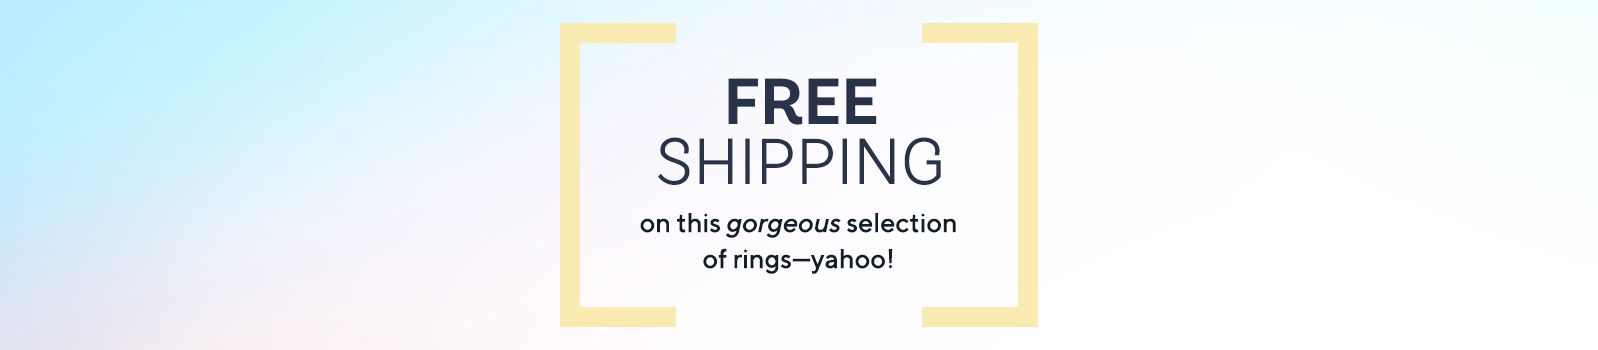 Free Shipping on this gorgeous selection of rings—yahoo!